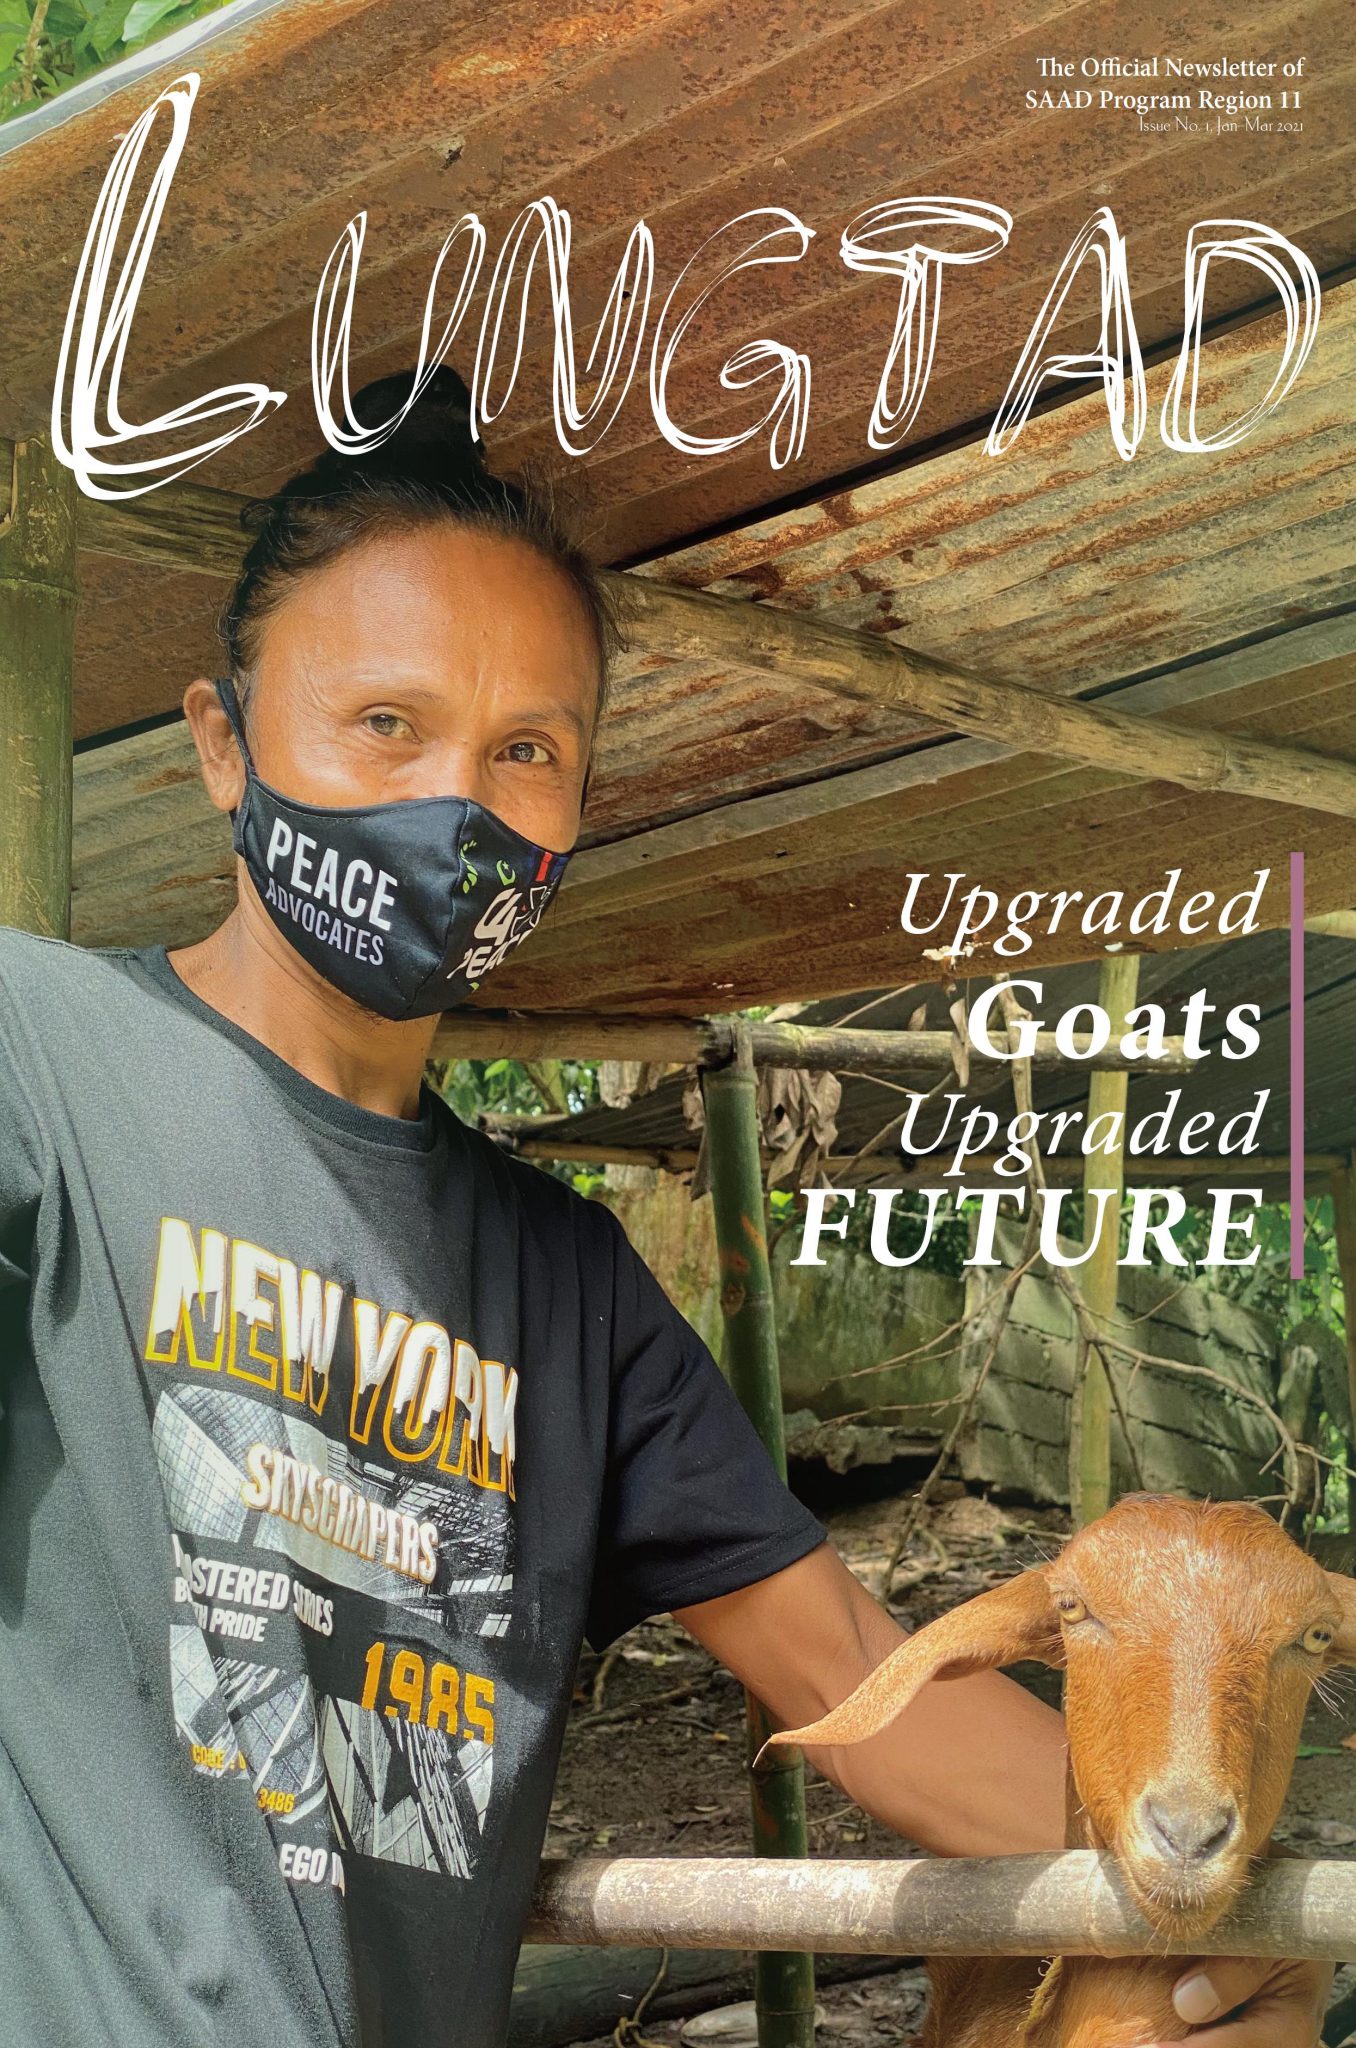 Lungtad Vol. 1 Issue No. 1.